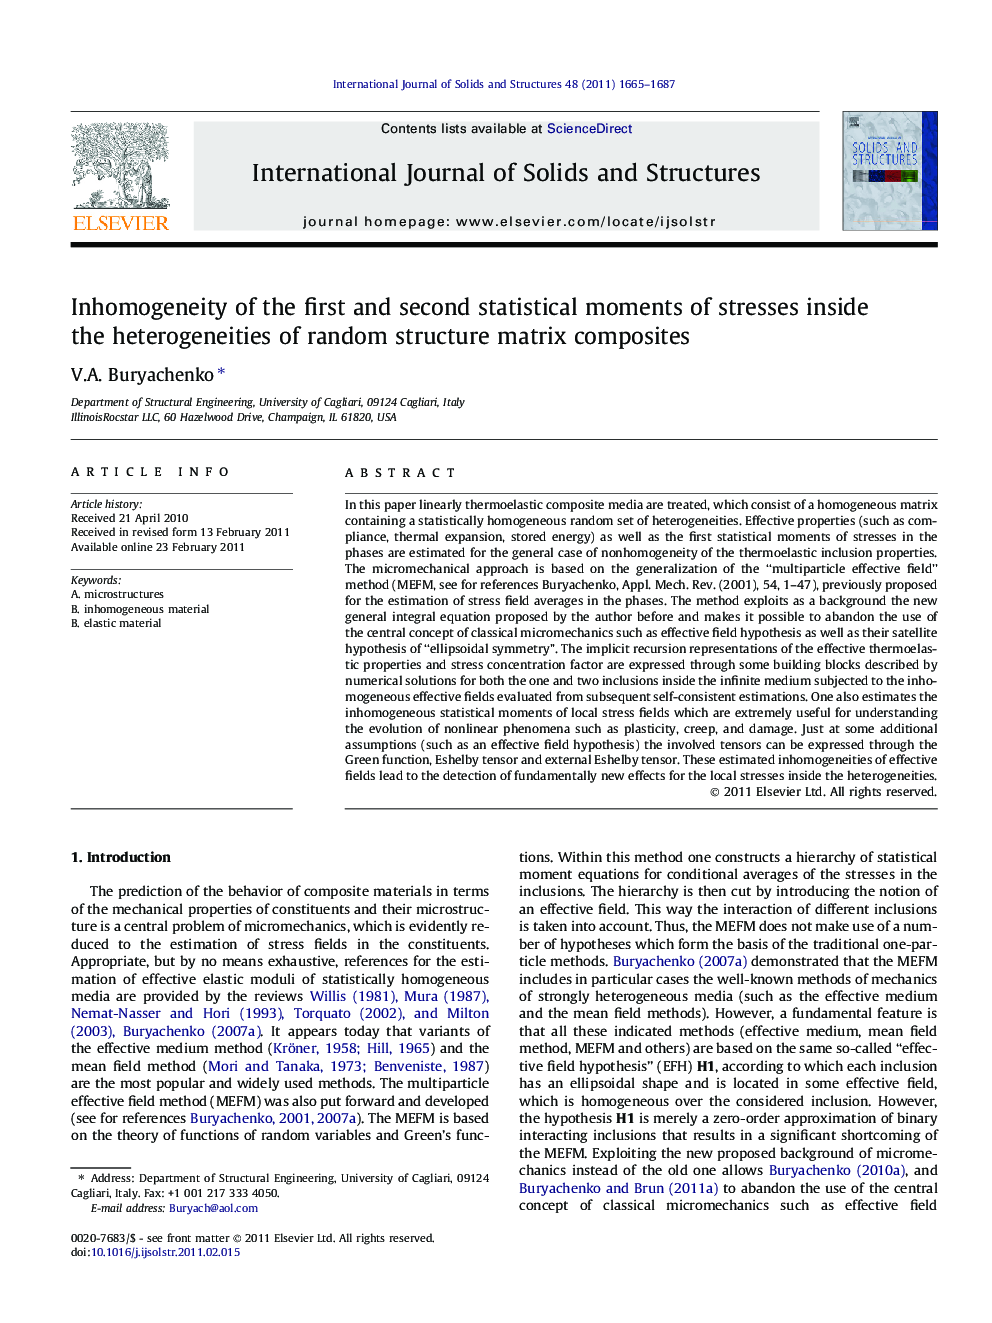 Inhomogeneity of the first and second statistical moments of stresses inside the heterogeneities of random structure matrix composites